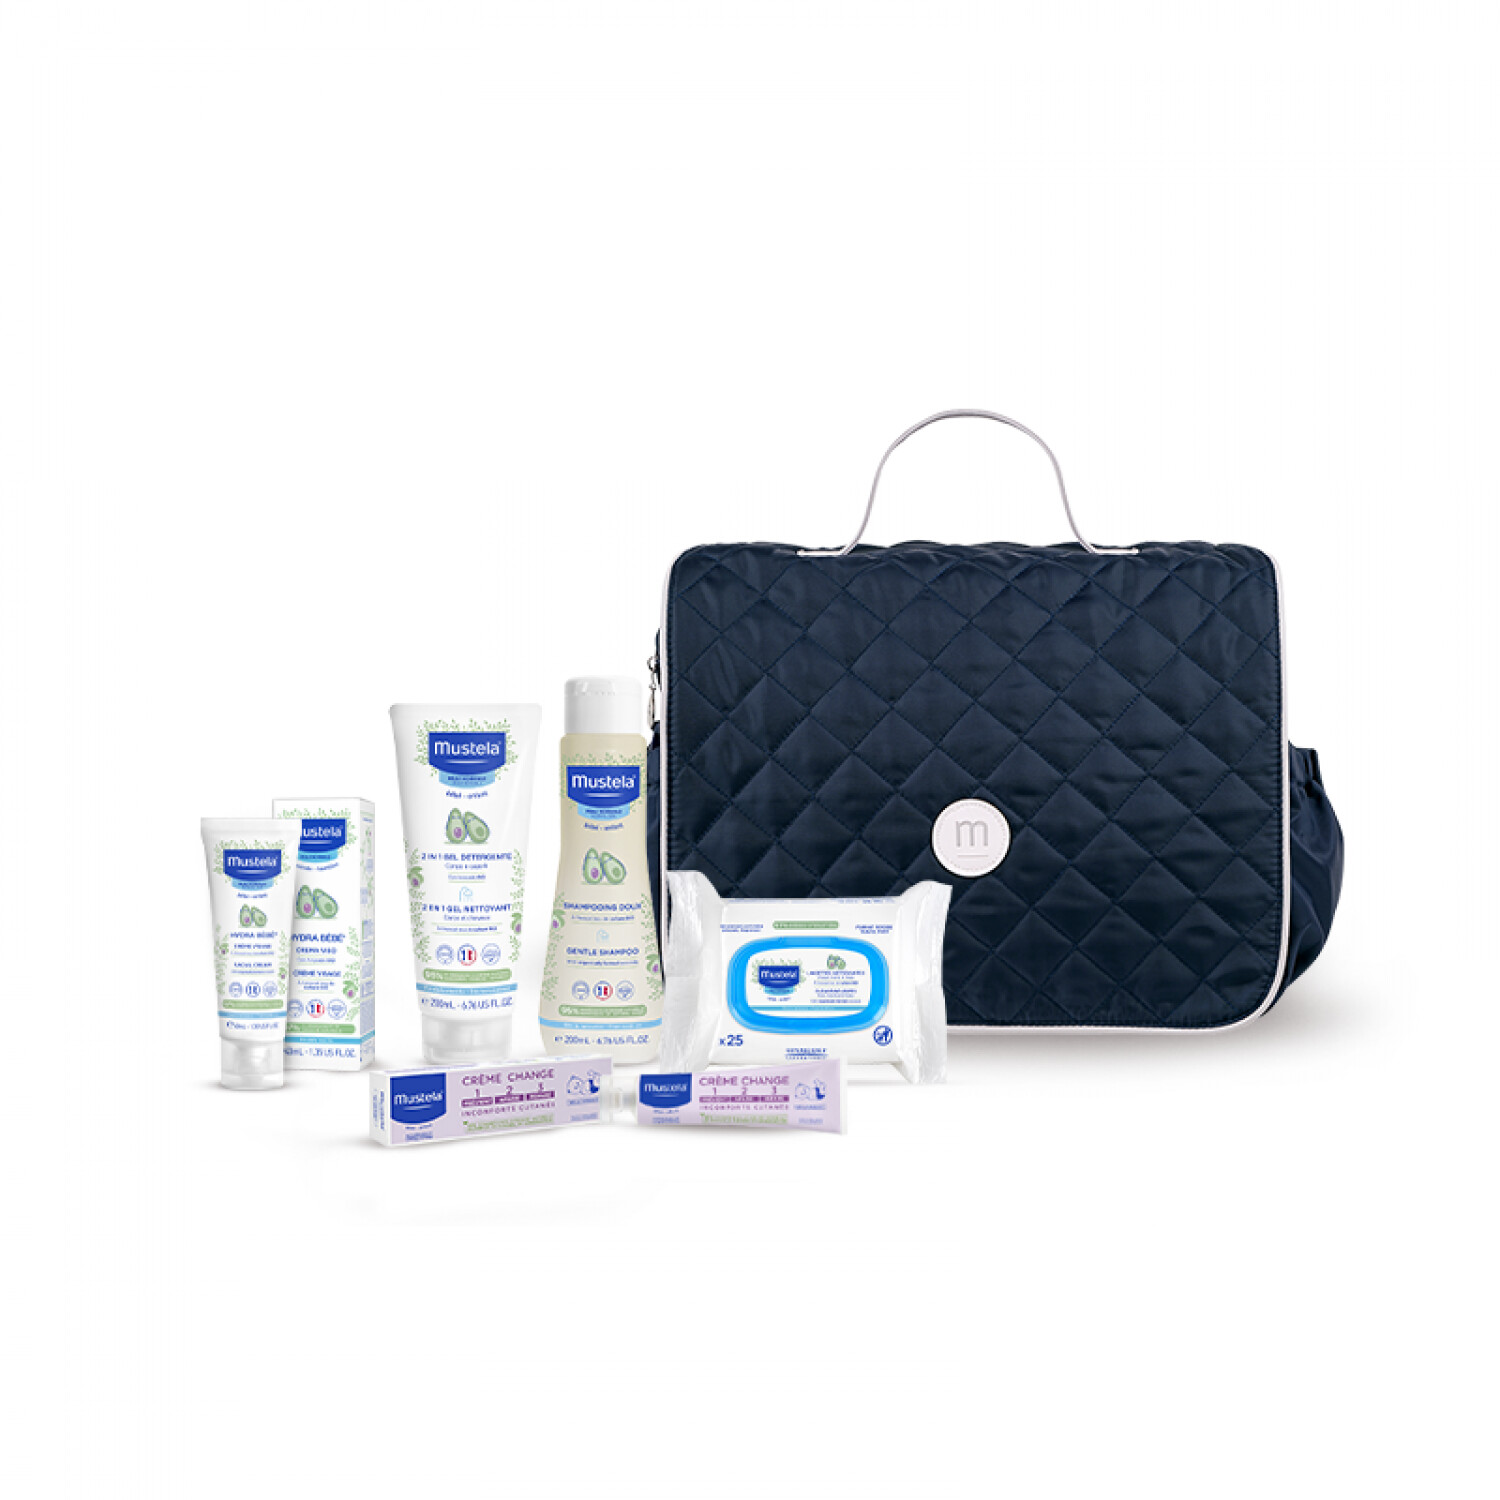 Mustela Baby Shower Pack + Pañalera, 10 Productos, Ideal